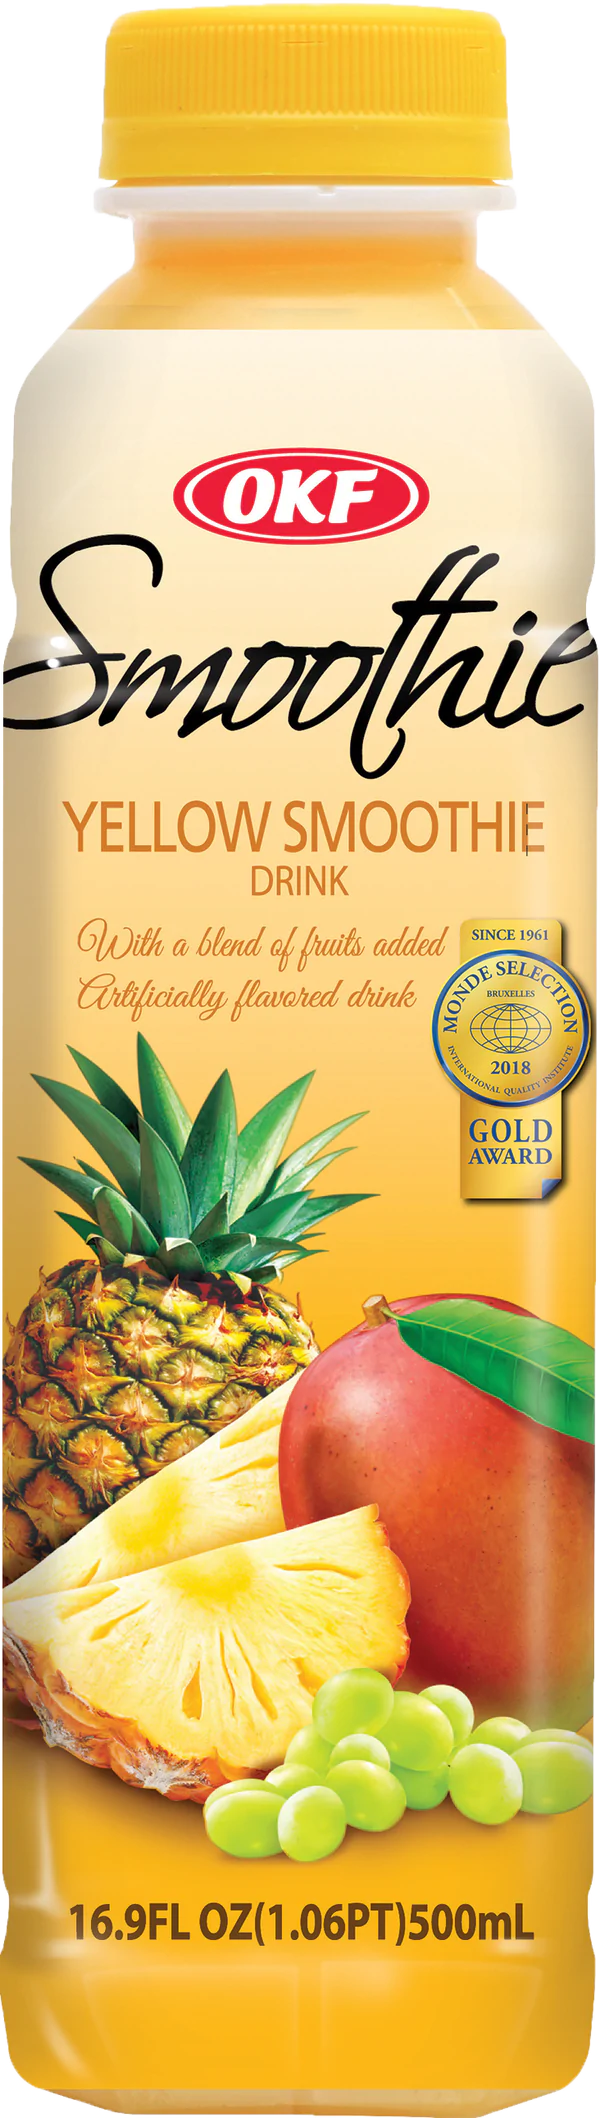 OKF Yellow Smoothie Drink 500 ml Snaxies Exotic Drinks Montreal Canada